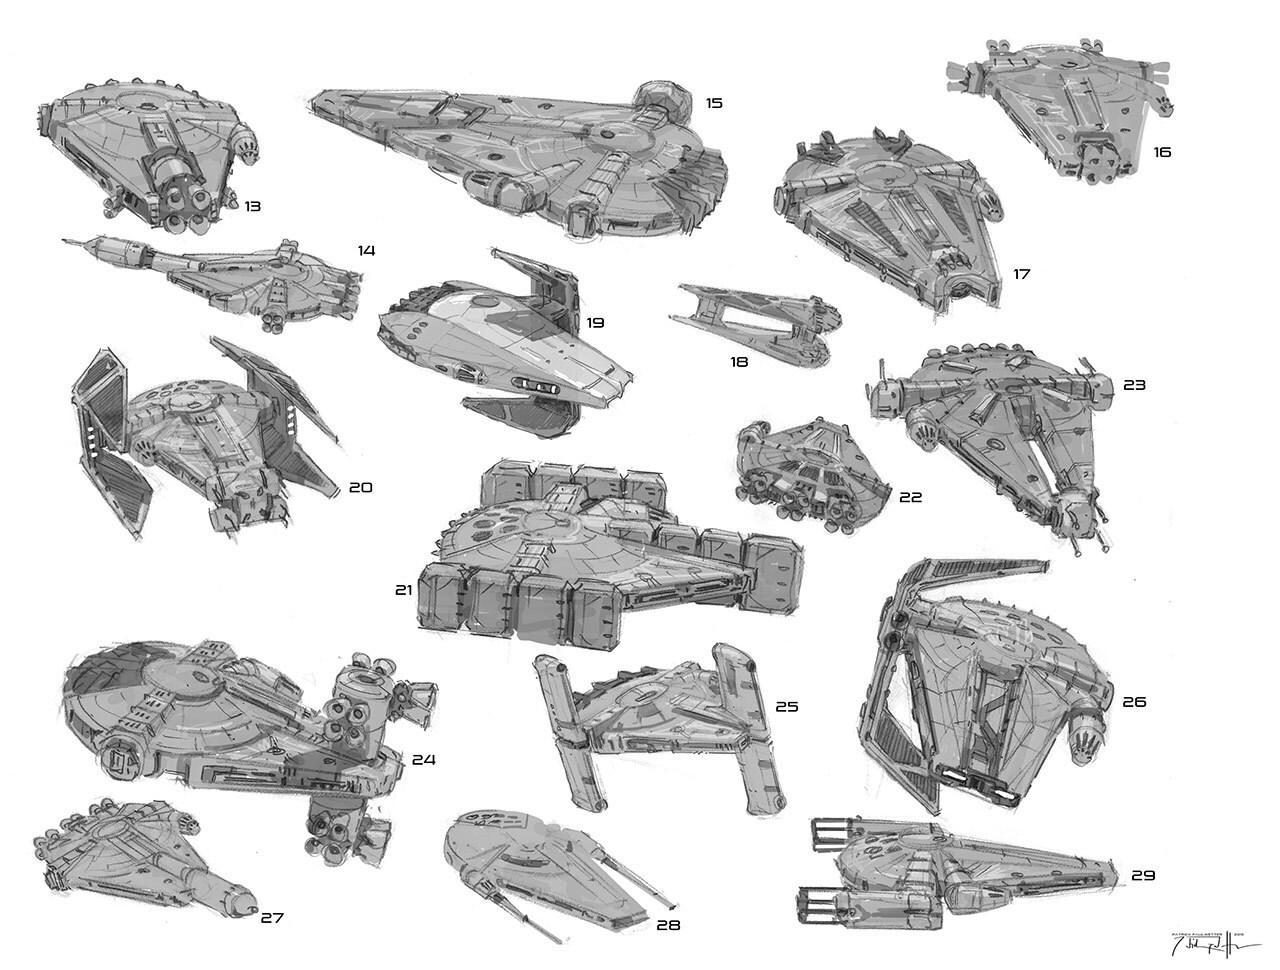 Sketches of the Millennium Falcon for the movie Solo: A Star Wars Story